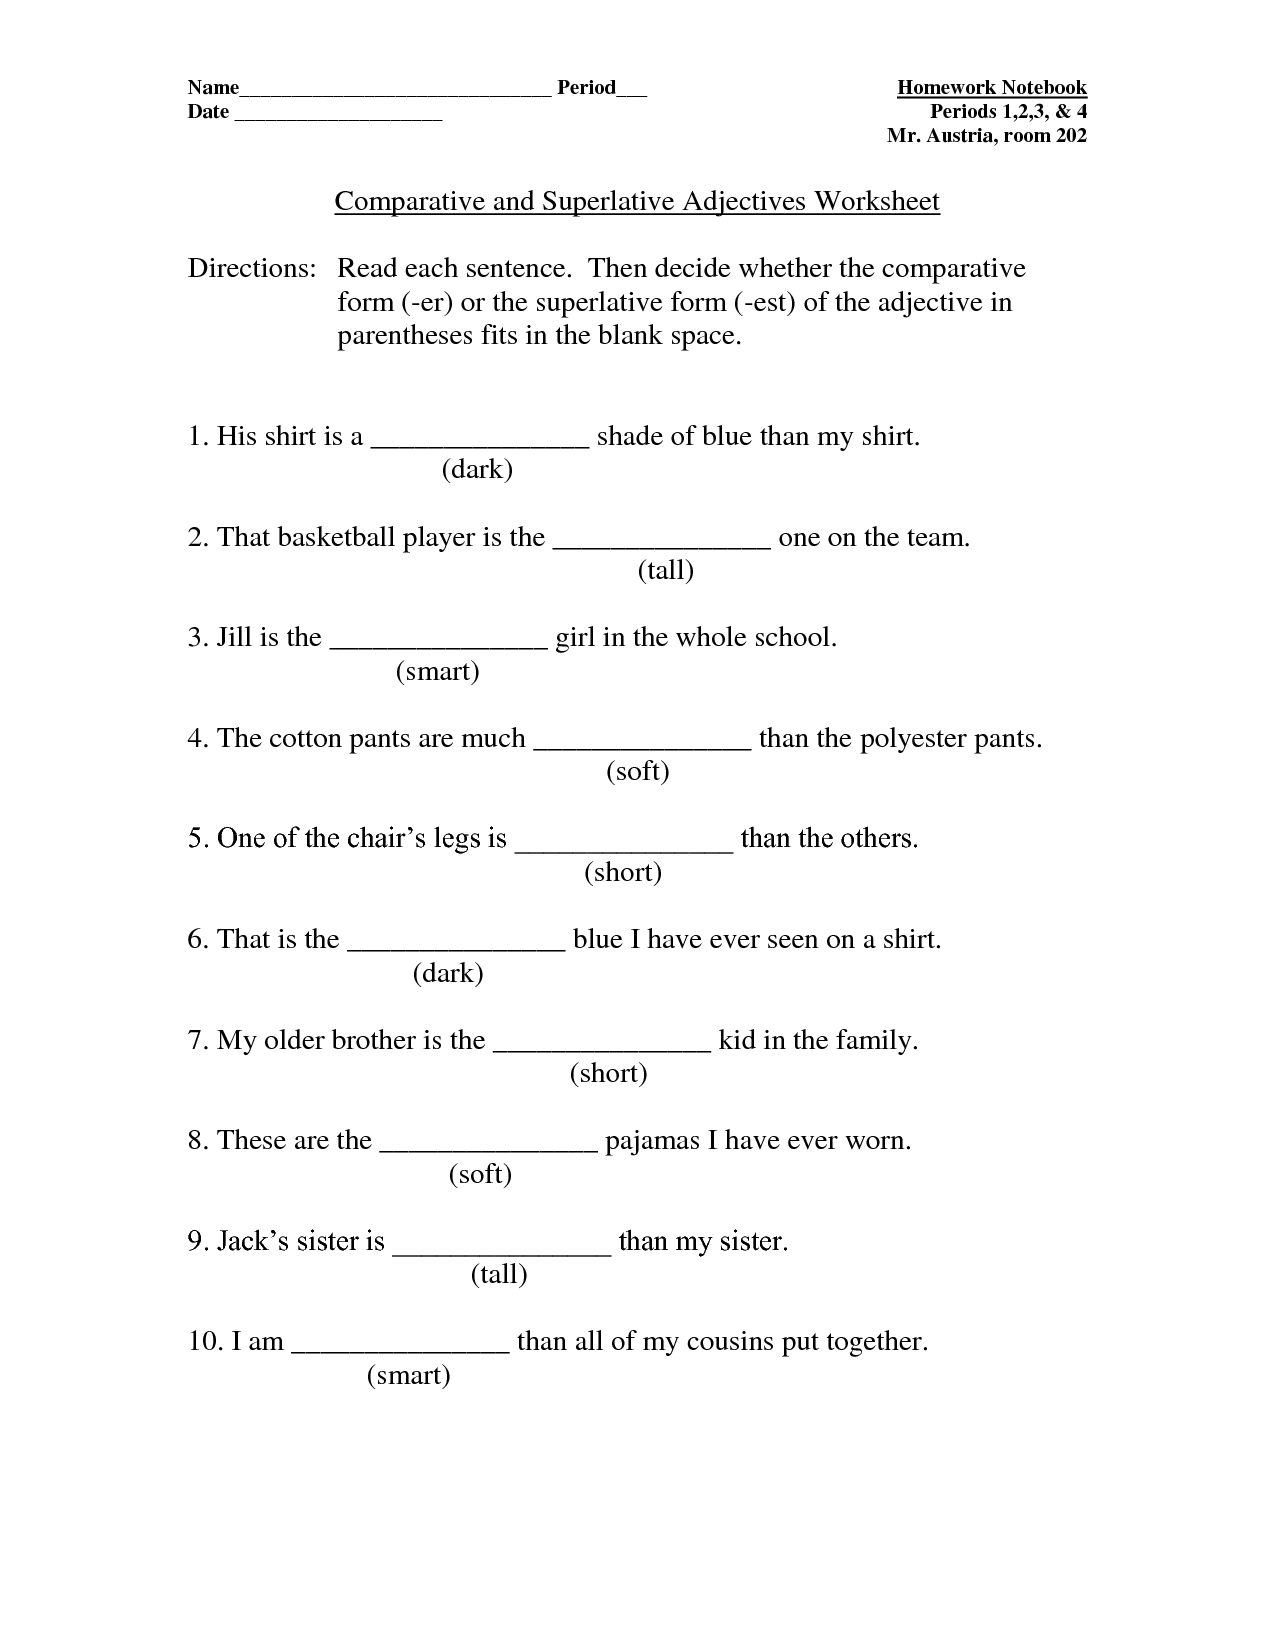 16-best-images-of-adjectives-that-compare-worksheets-comparative-adjectives-worksheets-3rd